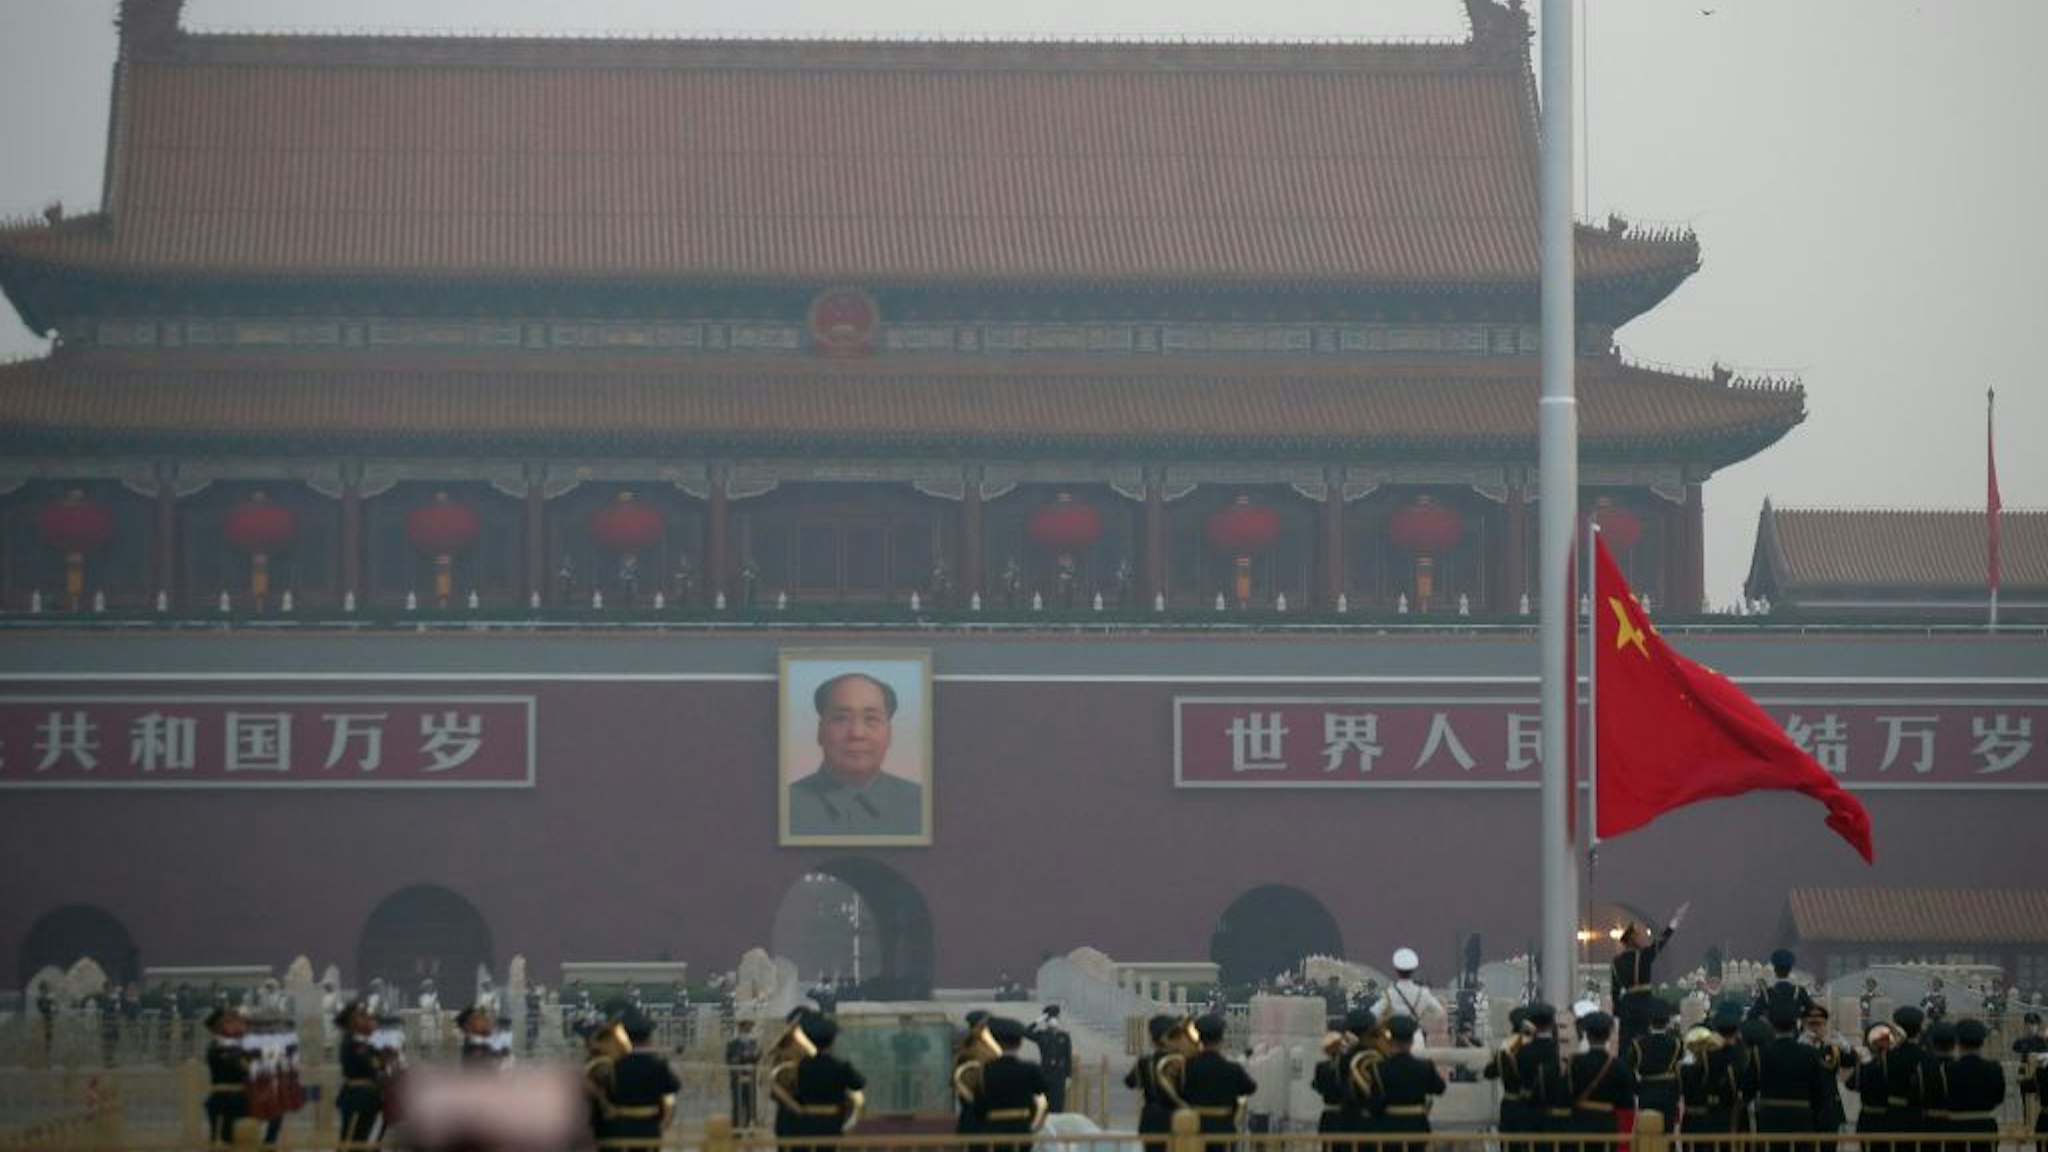 Chinese People's Liberation Army (PLA) officers attend the flag-raising ceremony at Tiananmen Square on the International Workers' Day on May 1, 2020 in Beijing, China.